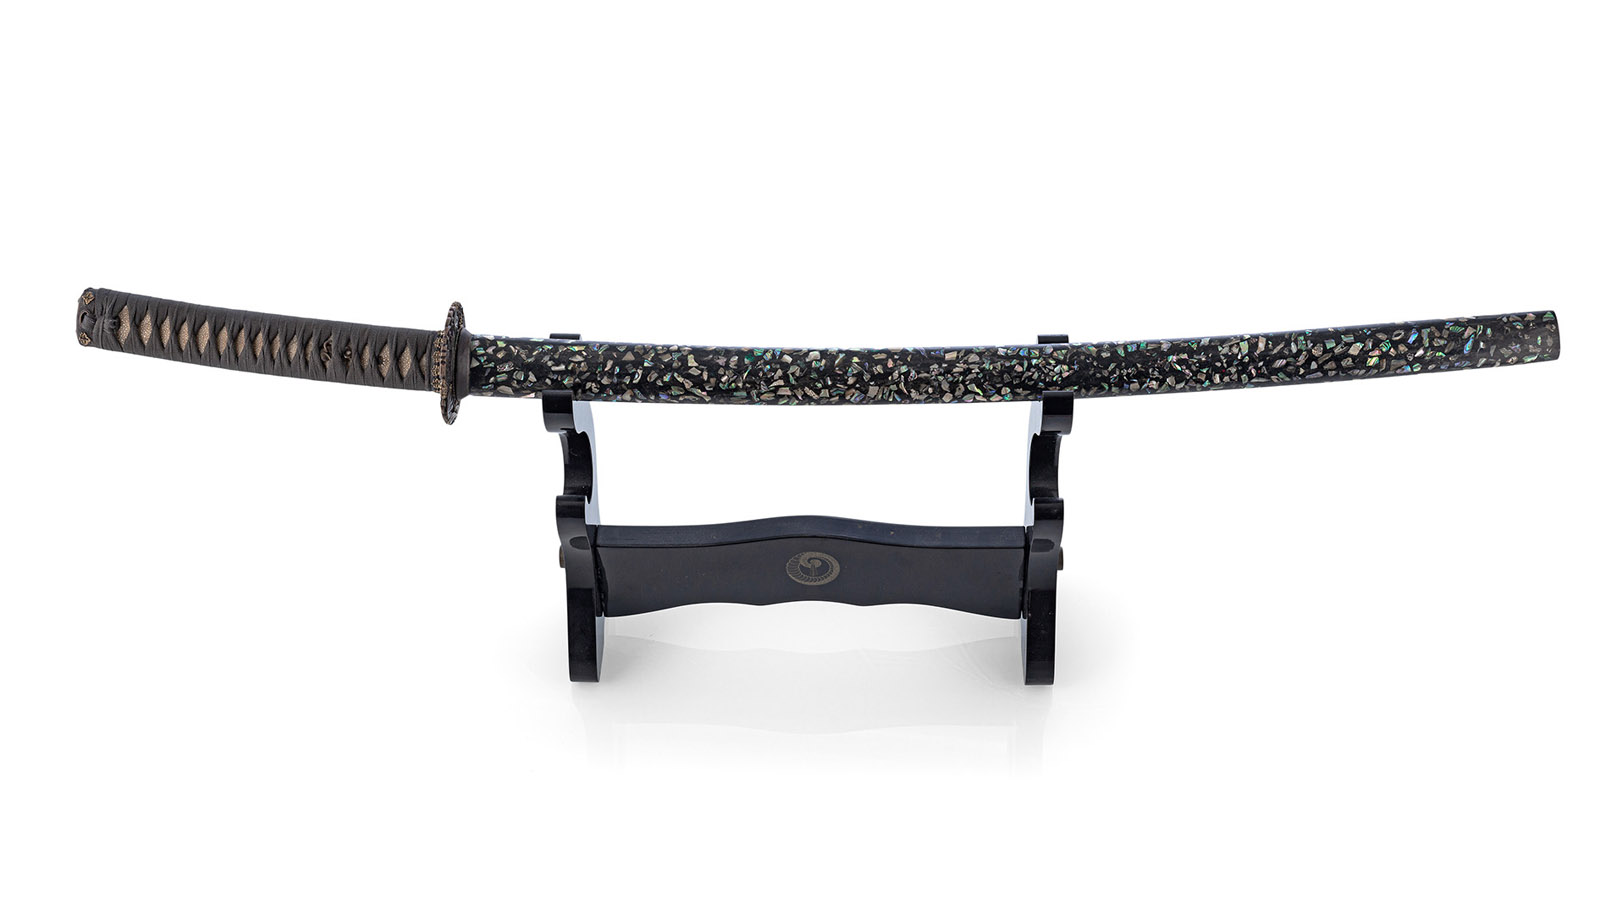 KATANA WITH LACQUER SCABBARD WITH MOTHER-OF-PEARL INLAYS